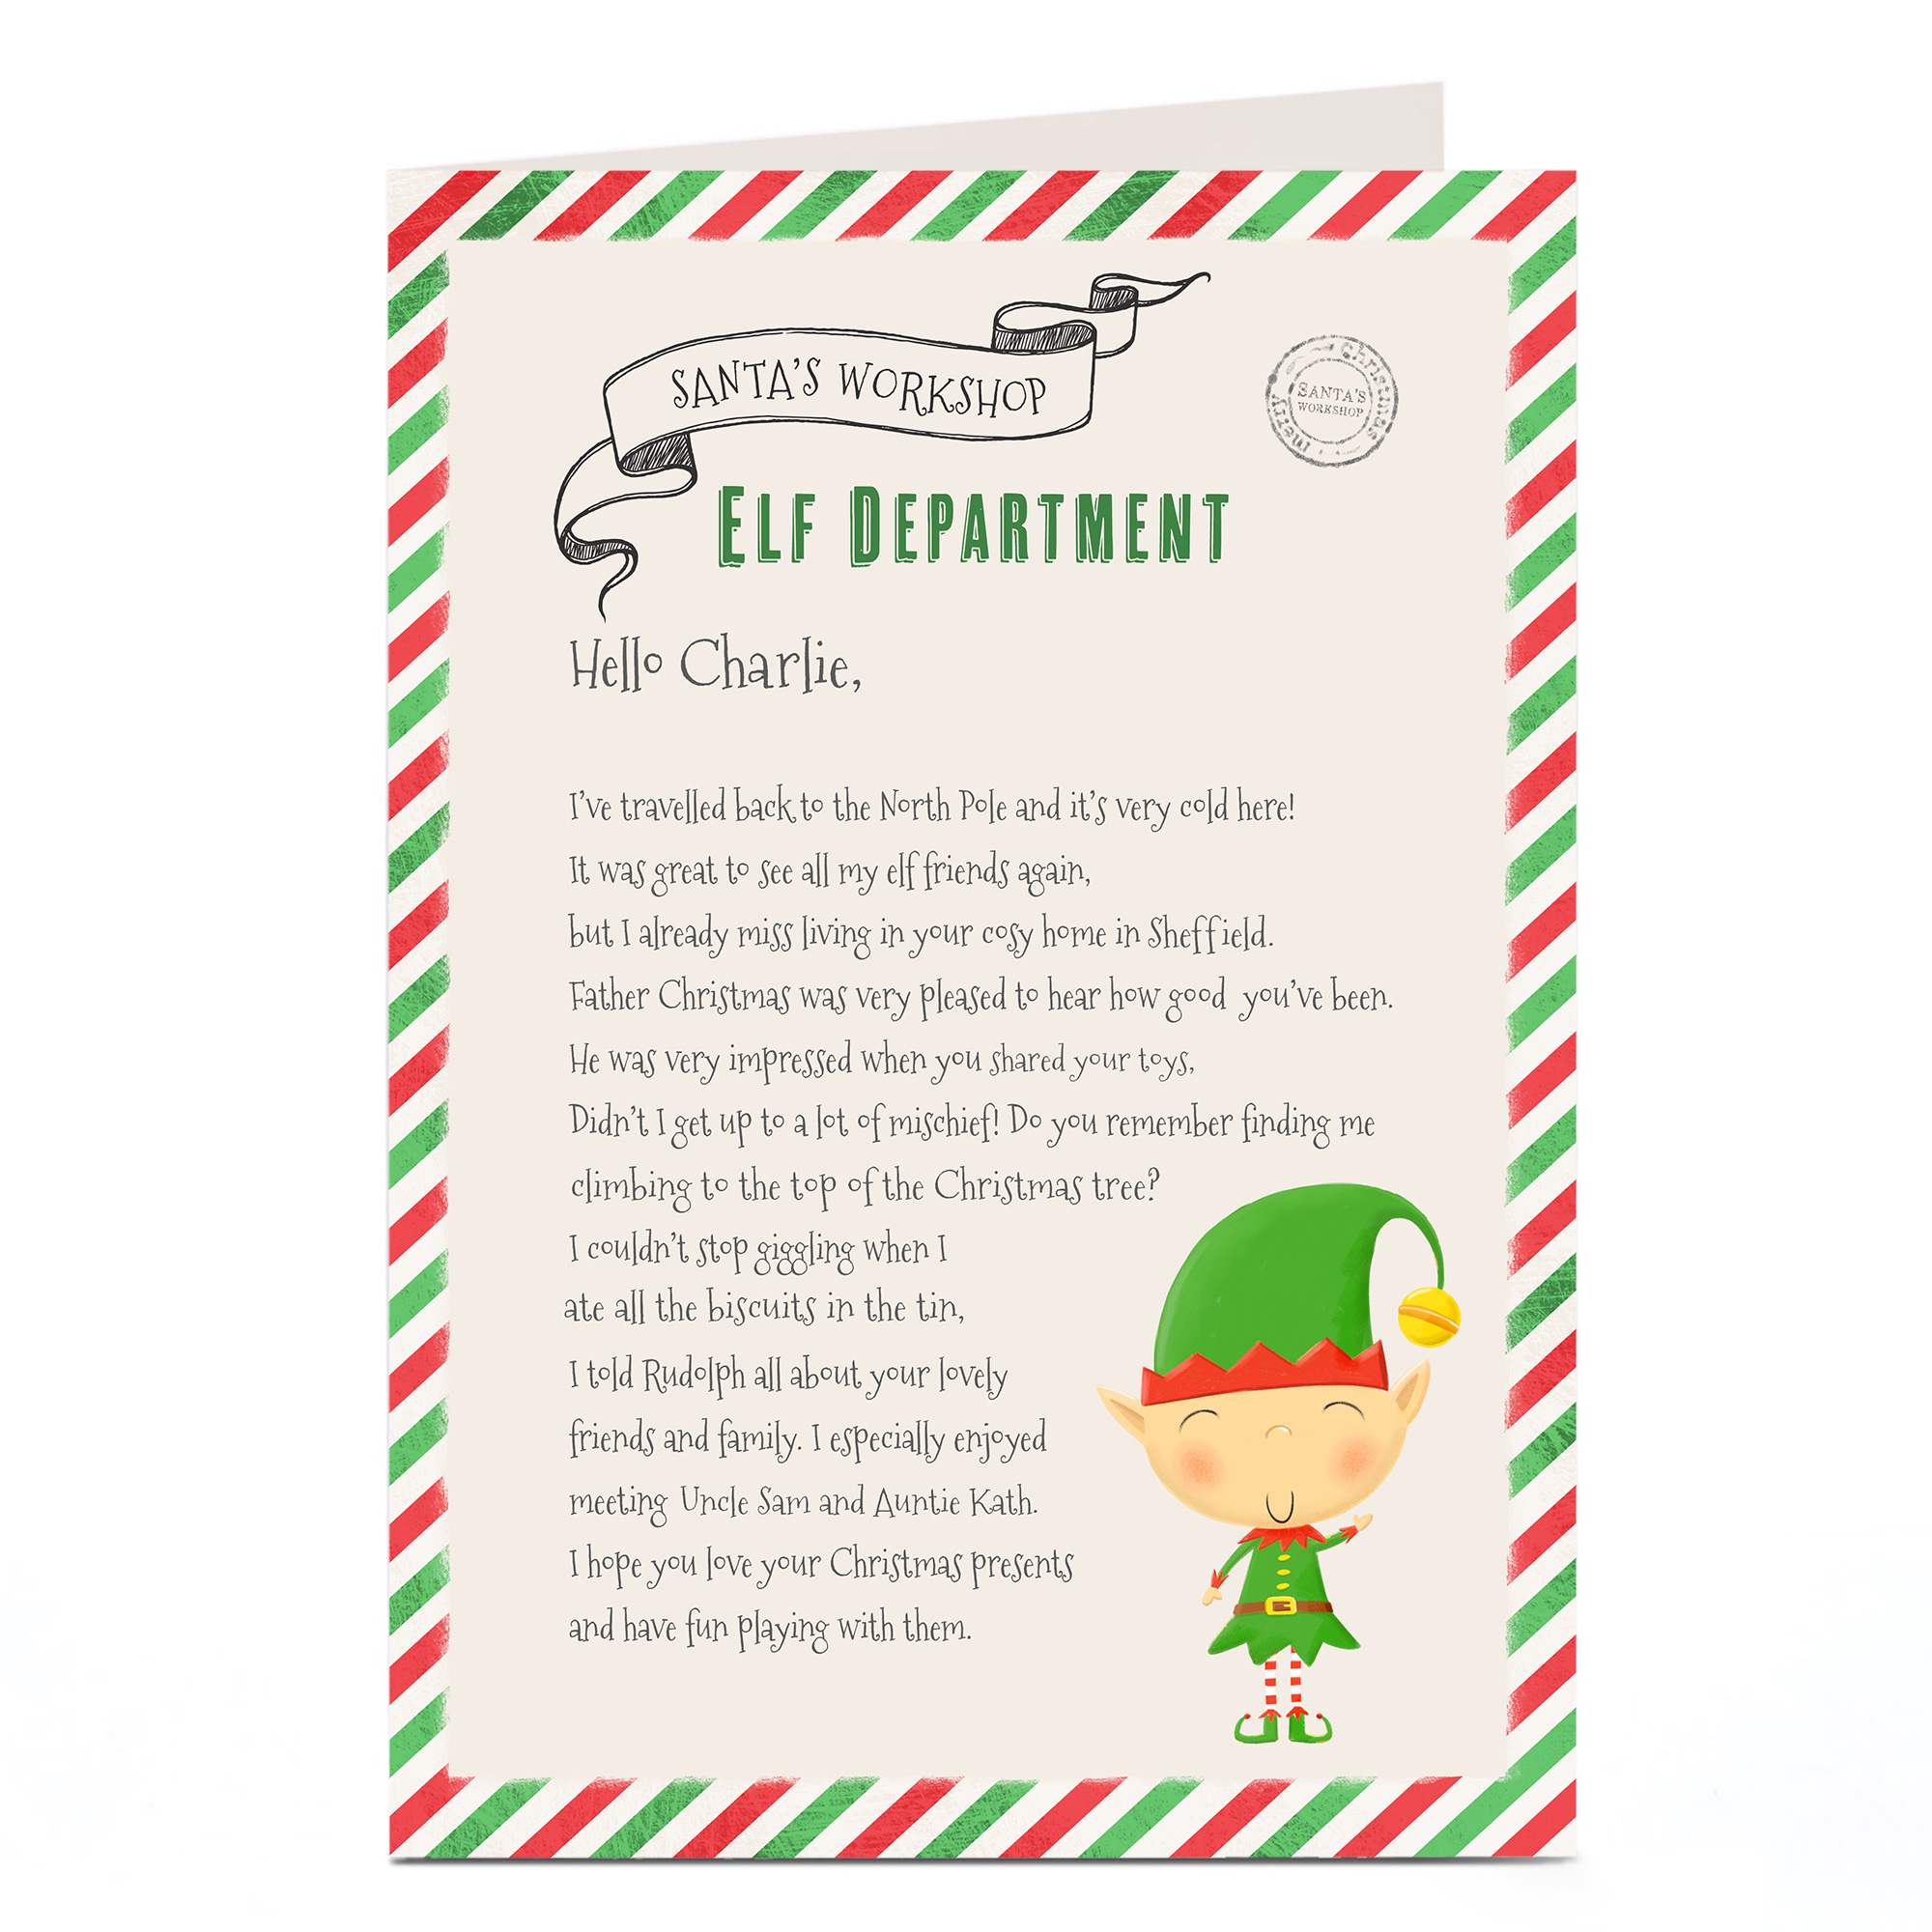 Personalised Letter From Santa - Elf Department